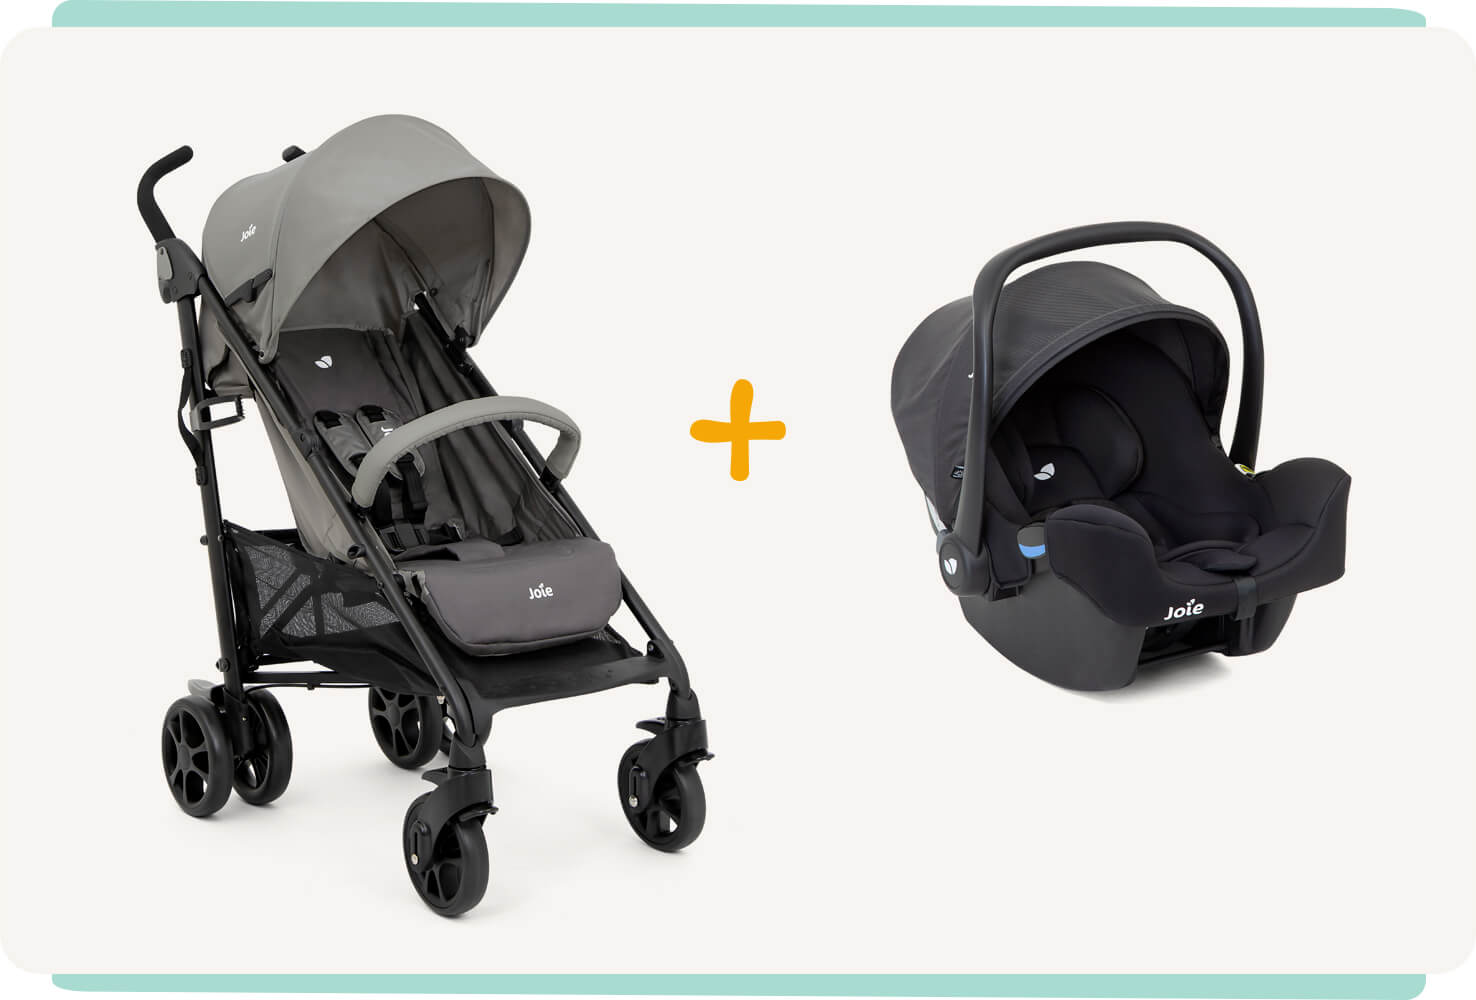   The Joie Brisk LX stroller in two tone gray, at an angle facing to the right, next to an I-Snug infant car seat in black, with an orange arrow in between the two.